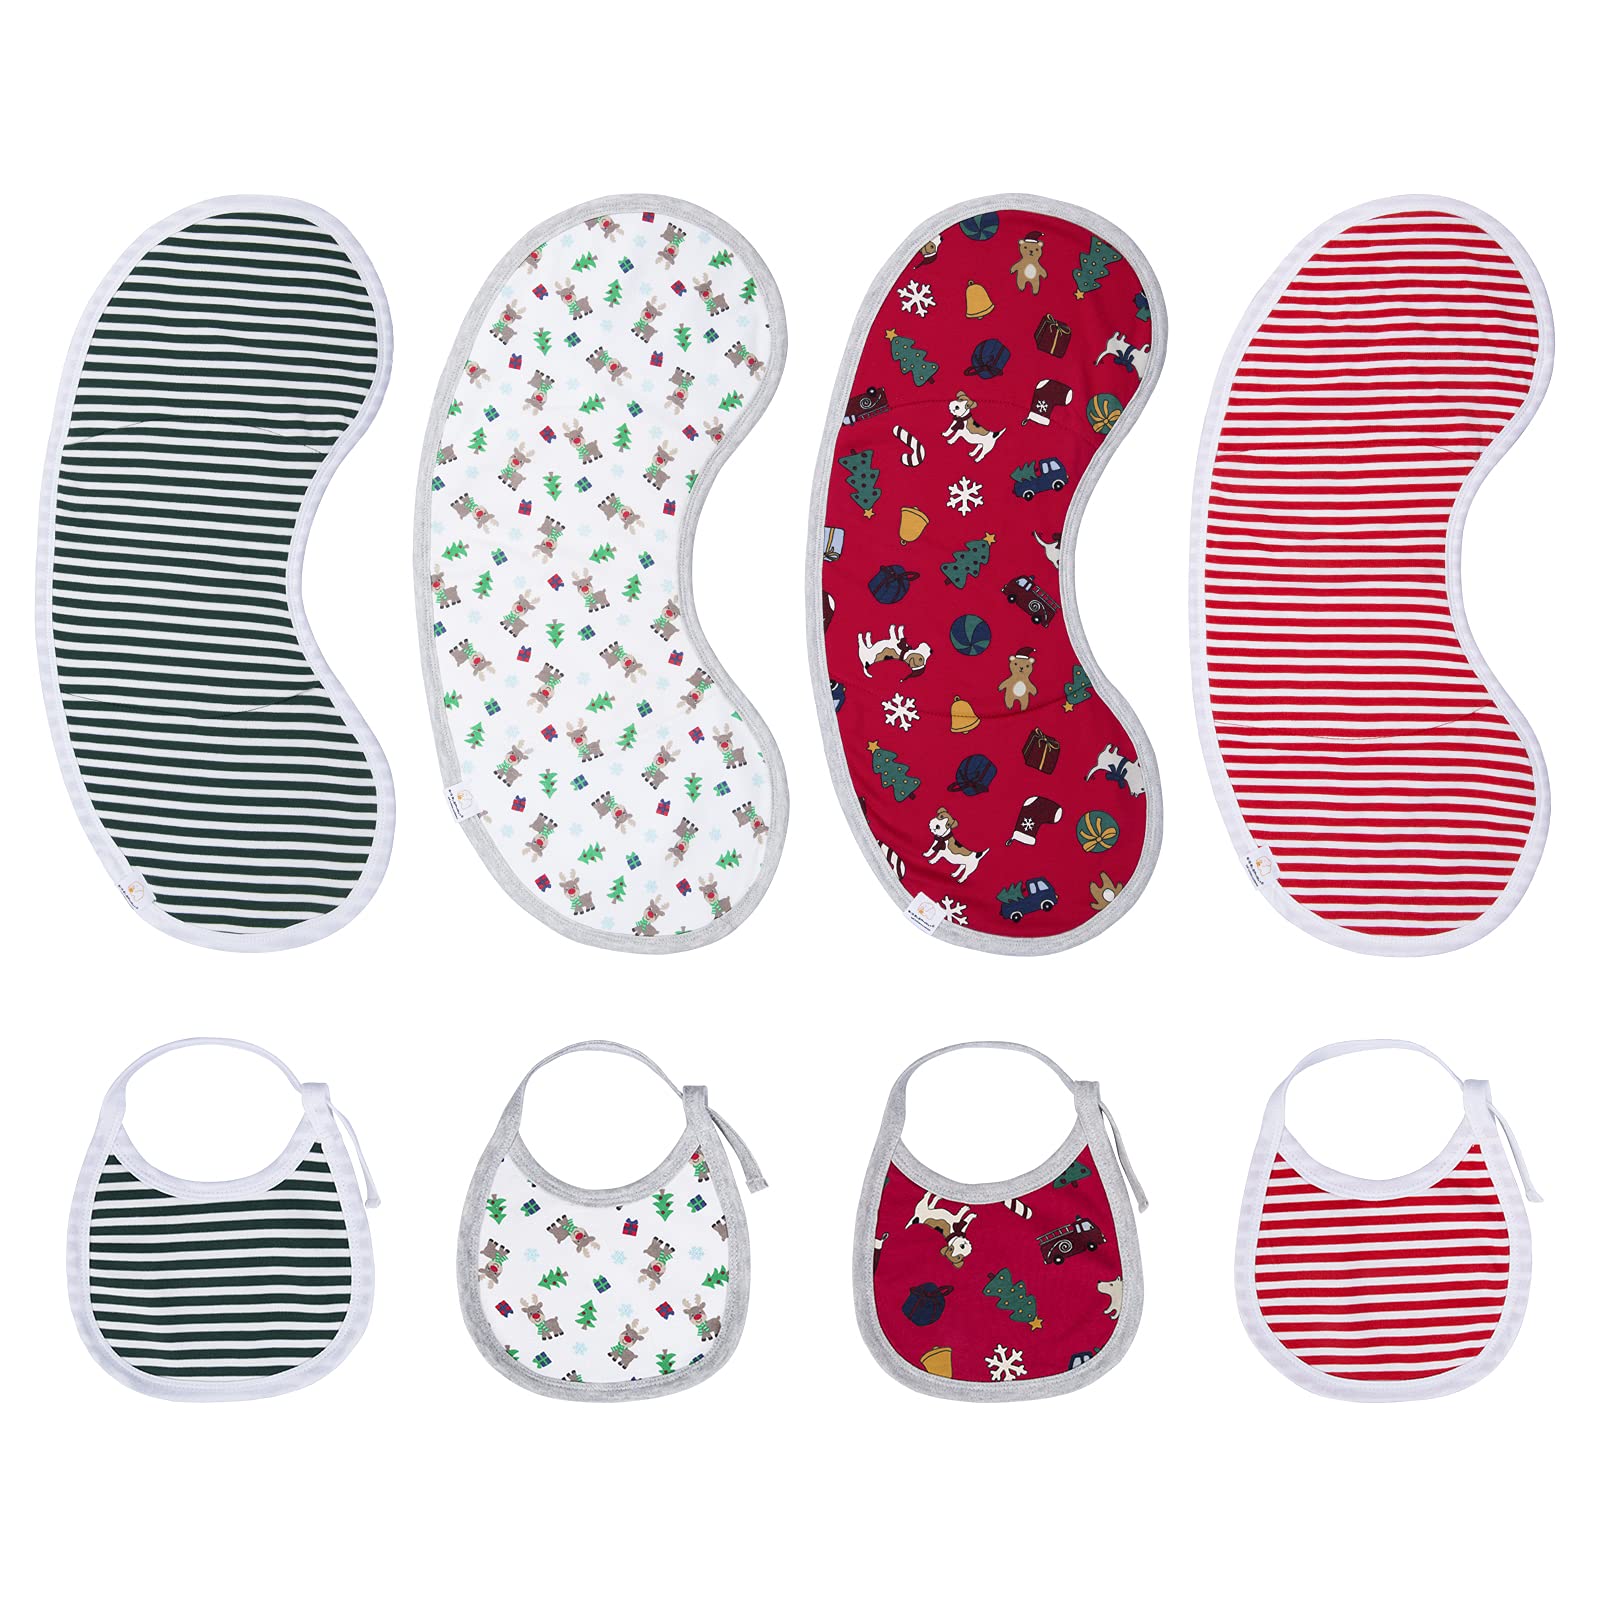 6 X BIG ELEPHANT CHRISTMAS UNISEX BABY PURE COTTON 8 PACK BURP CLOTH AND BIB SET SHOWER GIFTS FOR BOYS AND GIRLS - TOTAL RRP £93: LOCATION - RACK A